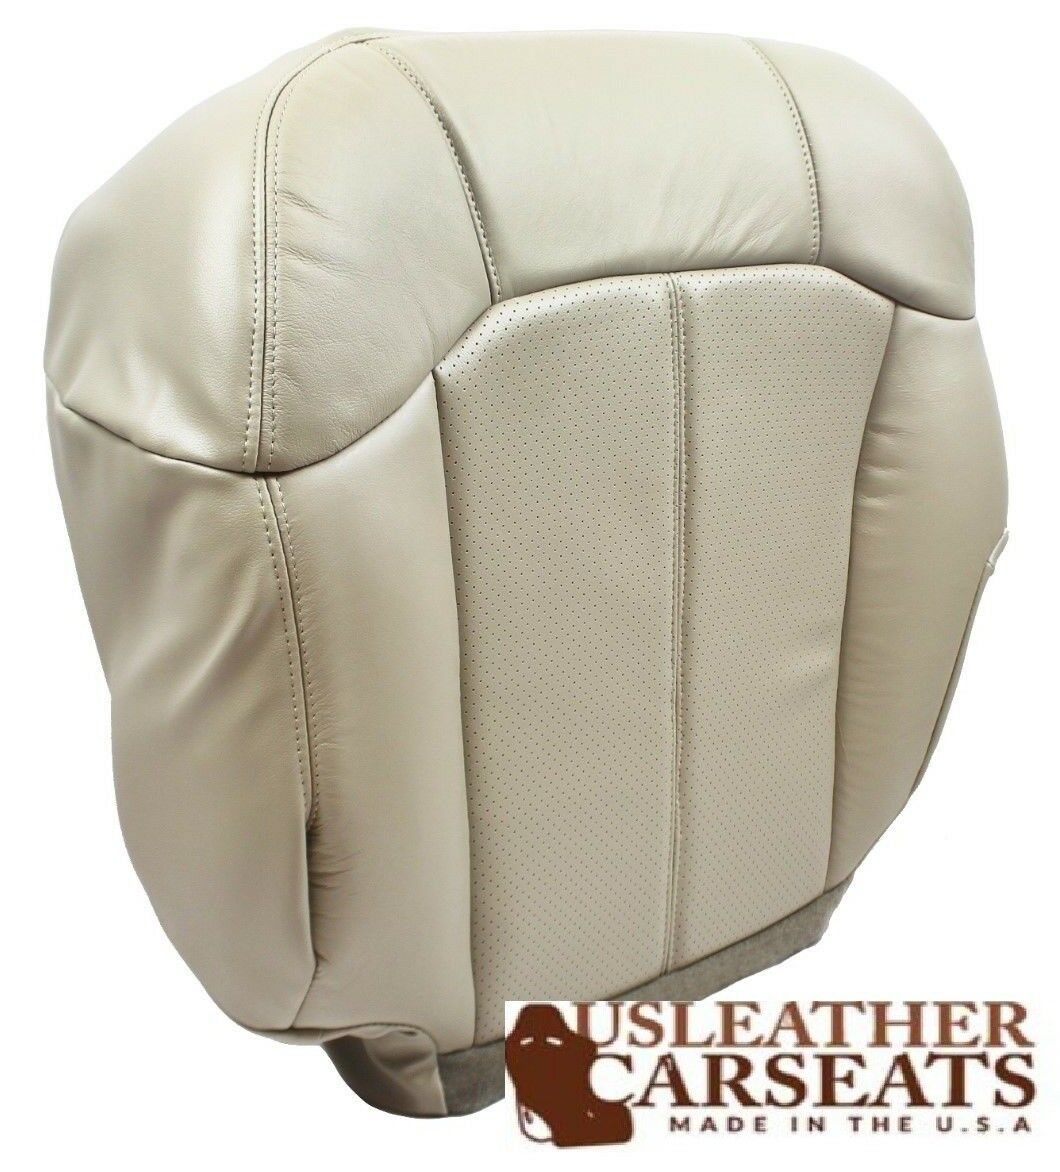 1999 Cadillac Escalade Driver Side . Bottom Perforated Leather Seat Cover Shale